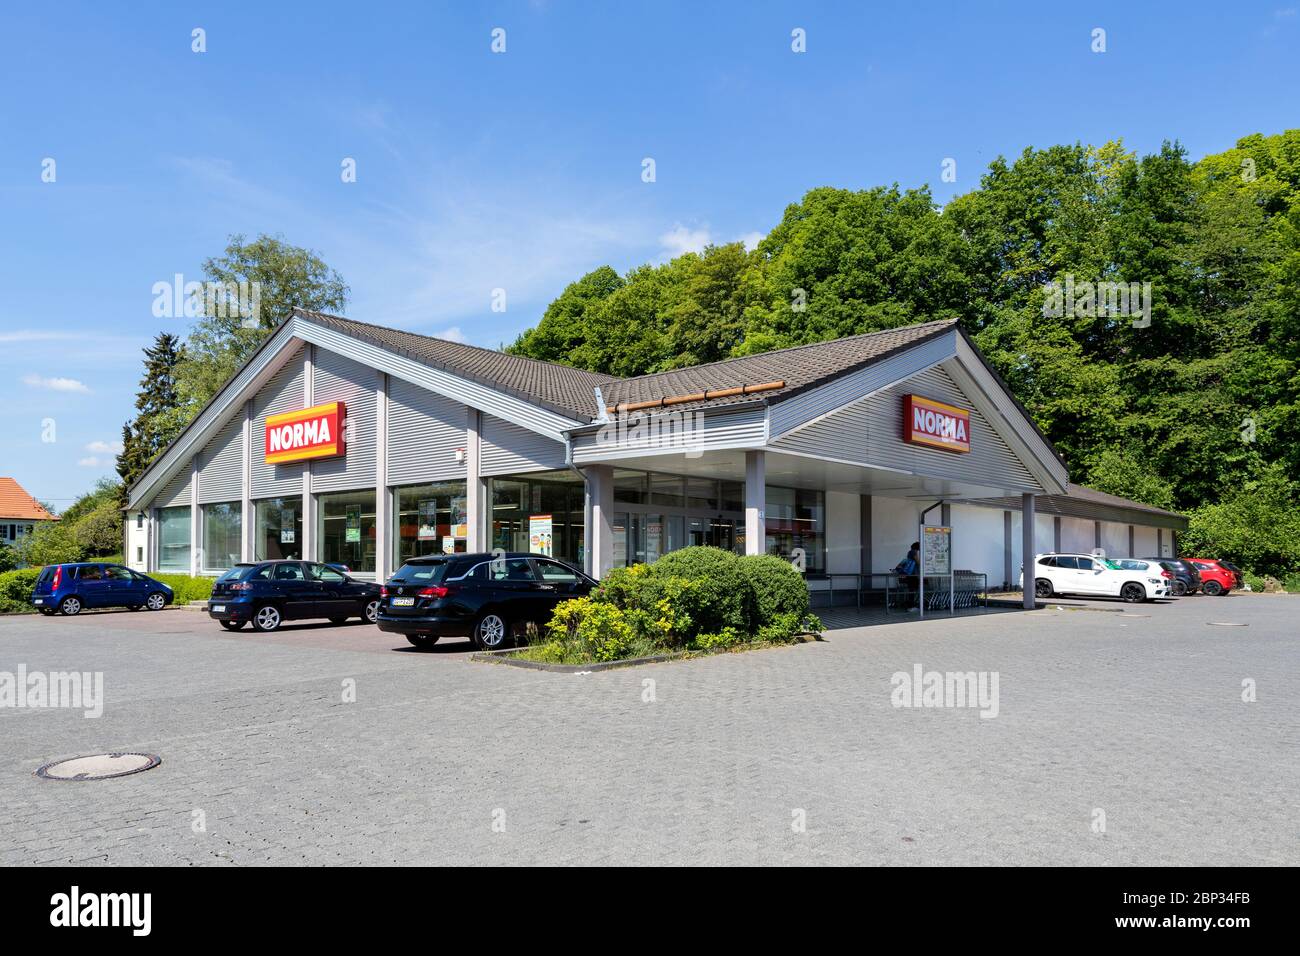 Norma branch in Waldbröl, Germany. Norma is a food discount store with more than 1,300 stores in Germany, Austria, France and the Czech Republic. Stock Photo